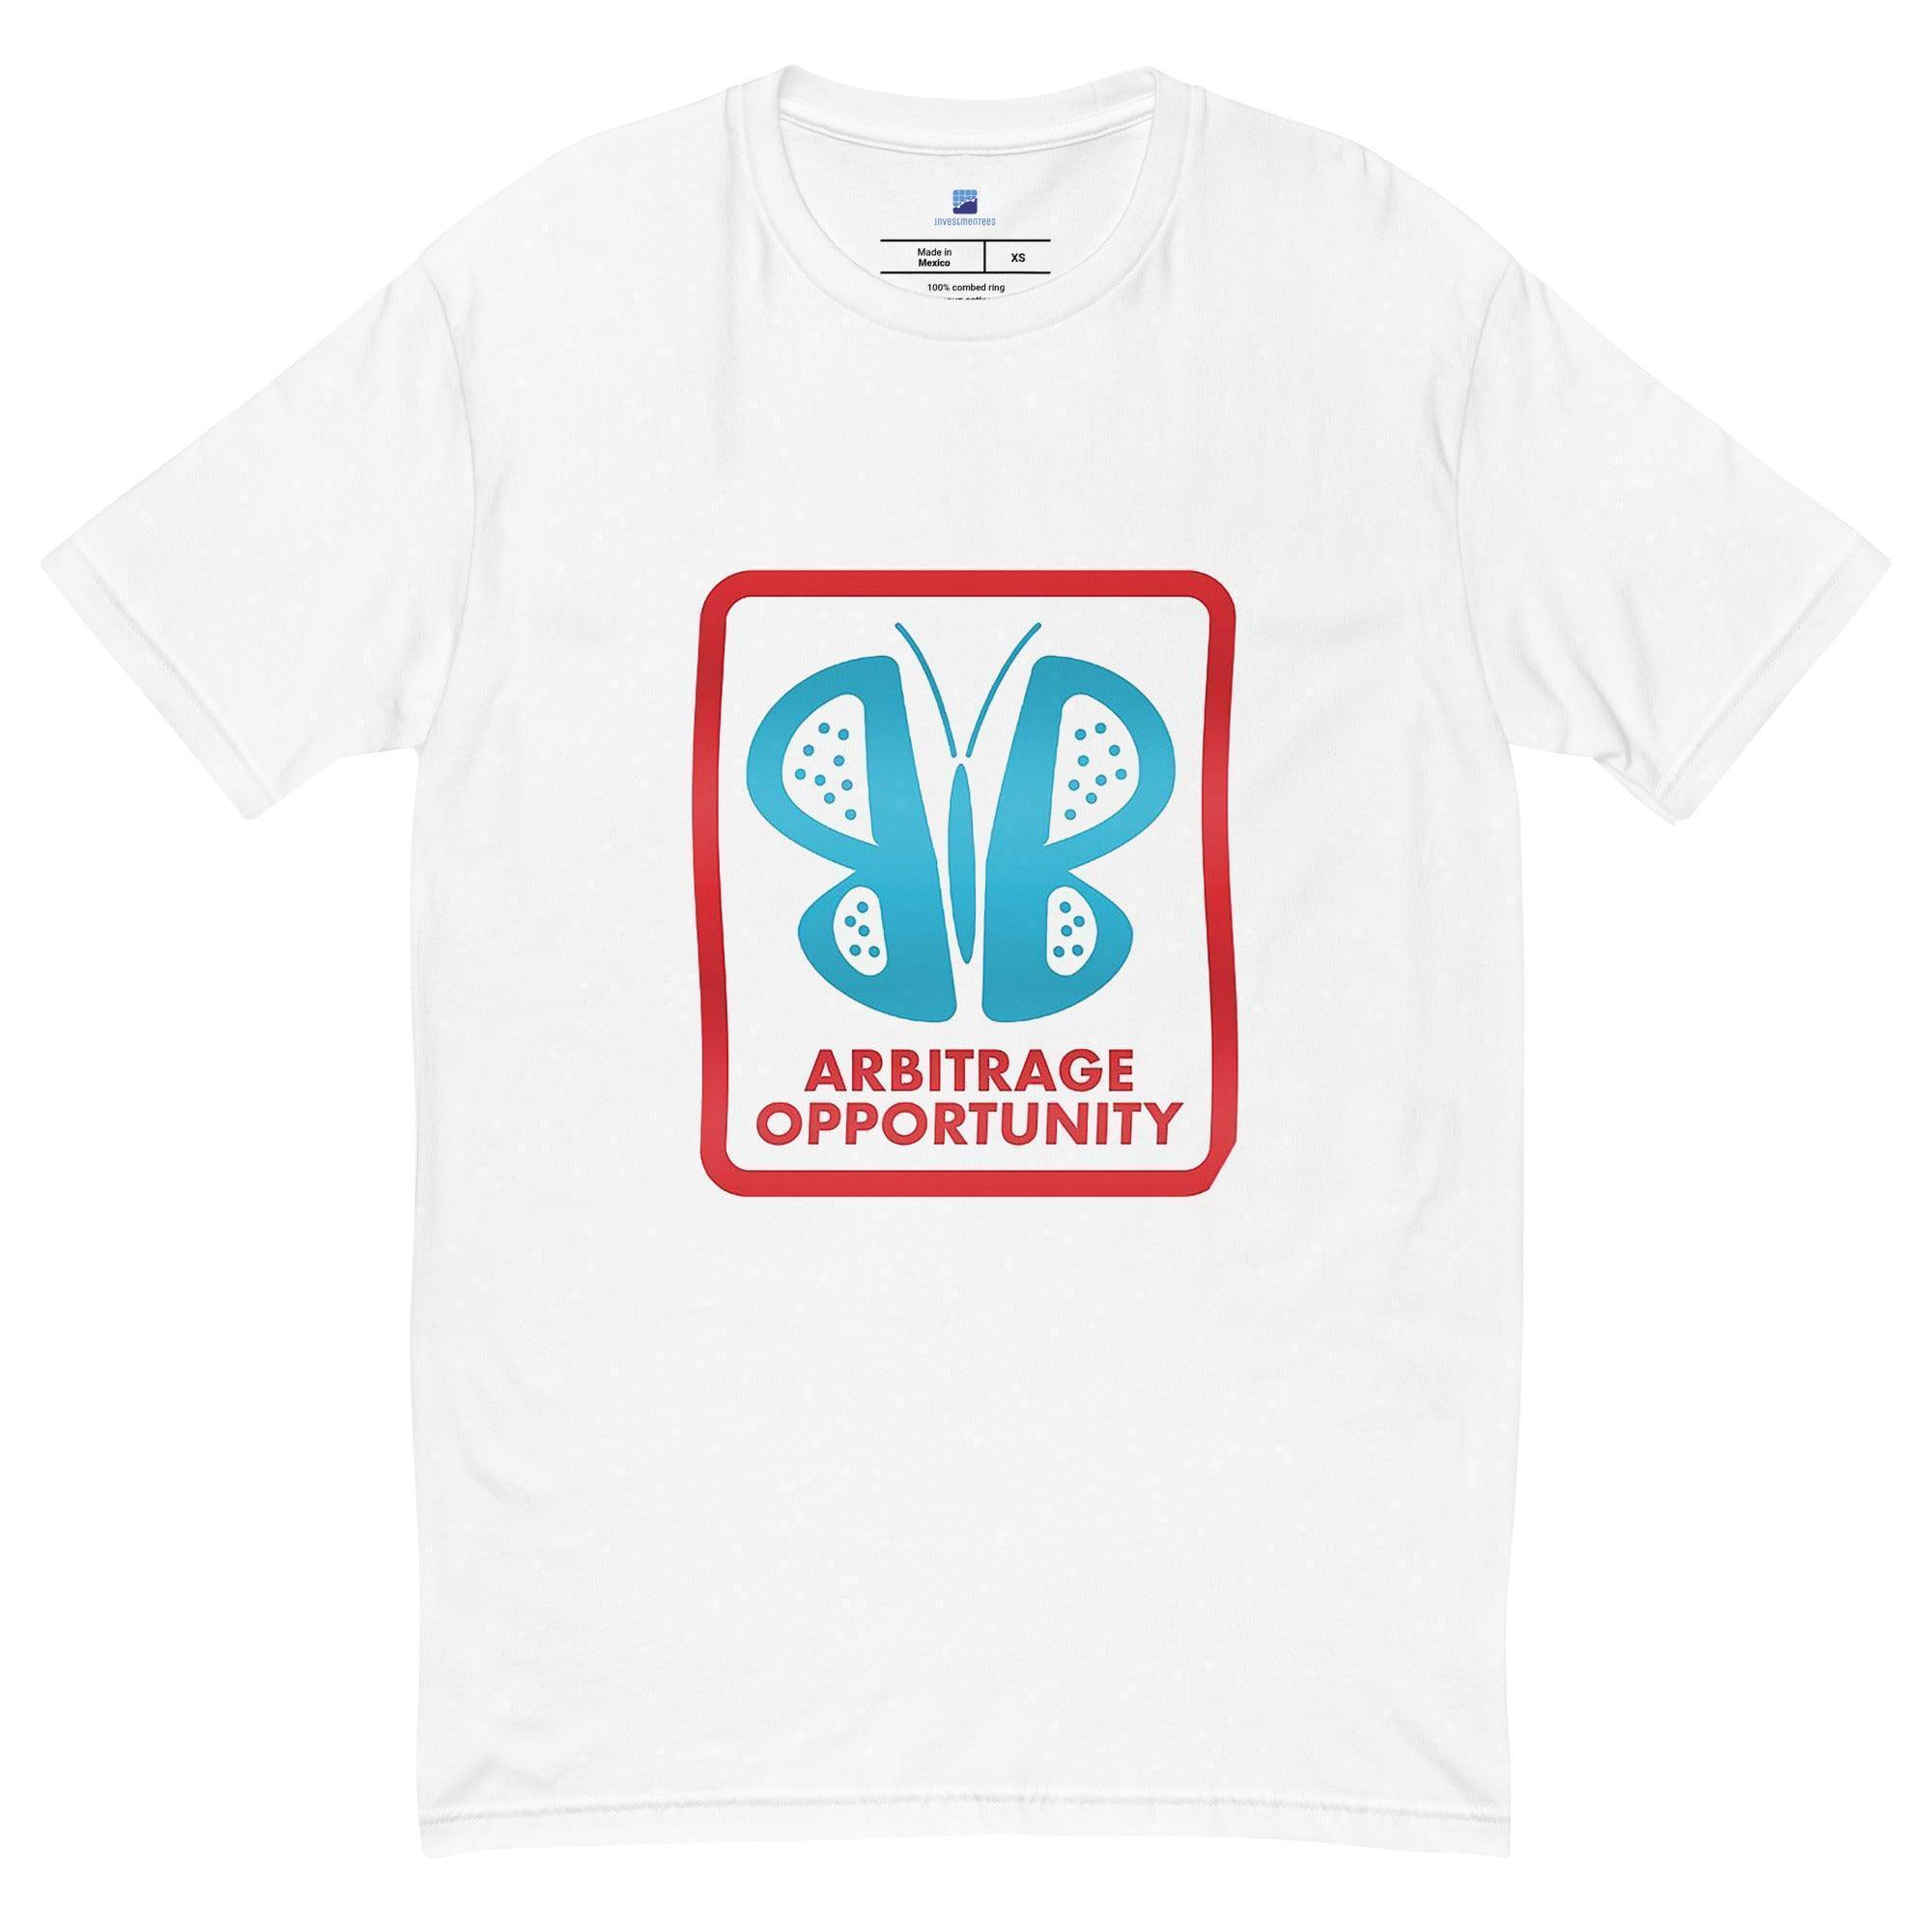 Arbitrage Opportunity T-Shirt - InvestmenTees